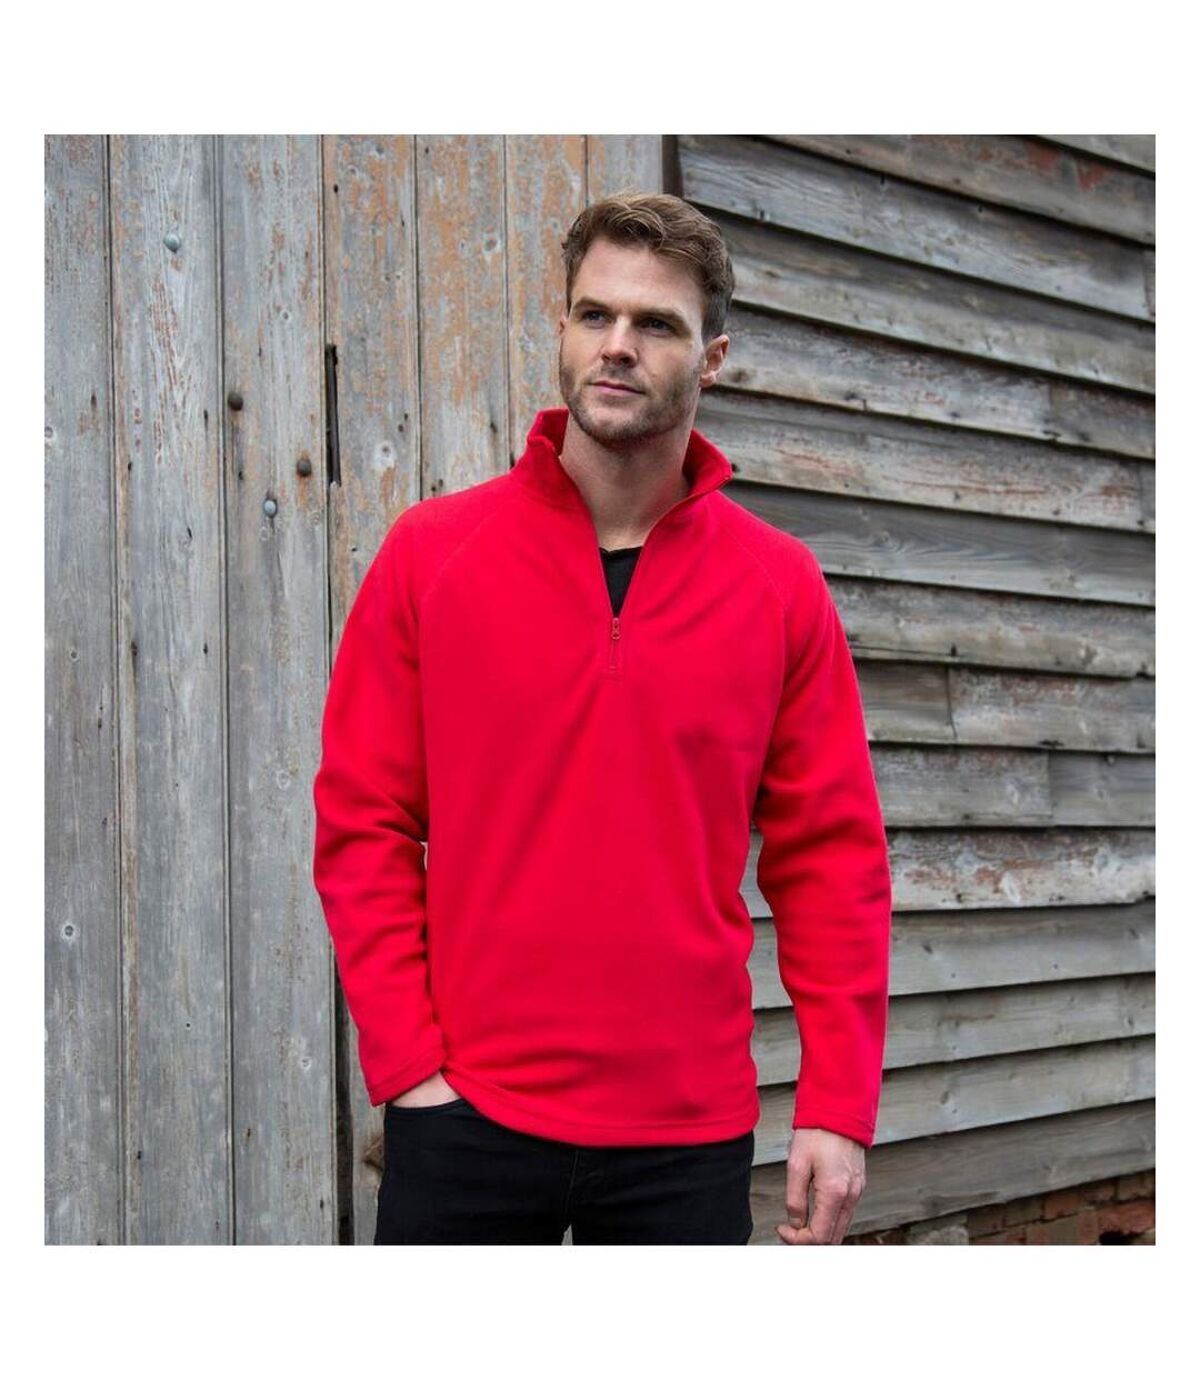 Result Mens Core Micron Anti-Pill Fleece Top (Red)